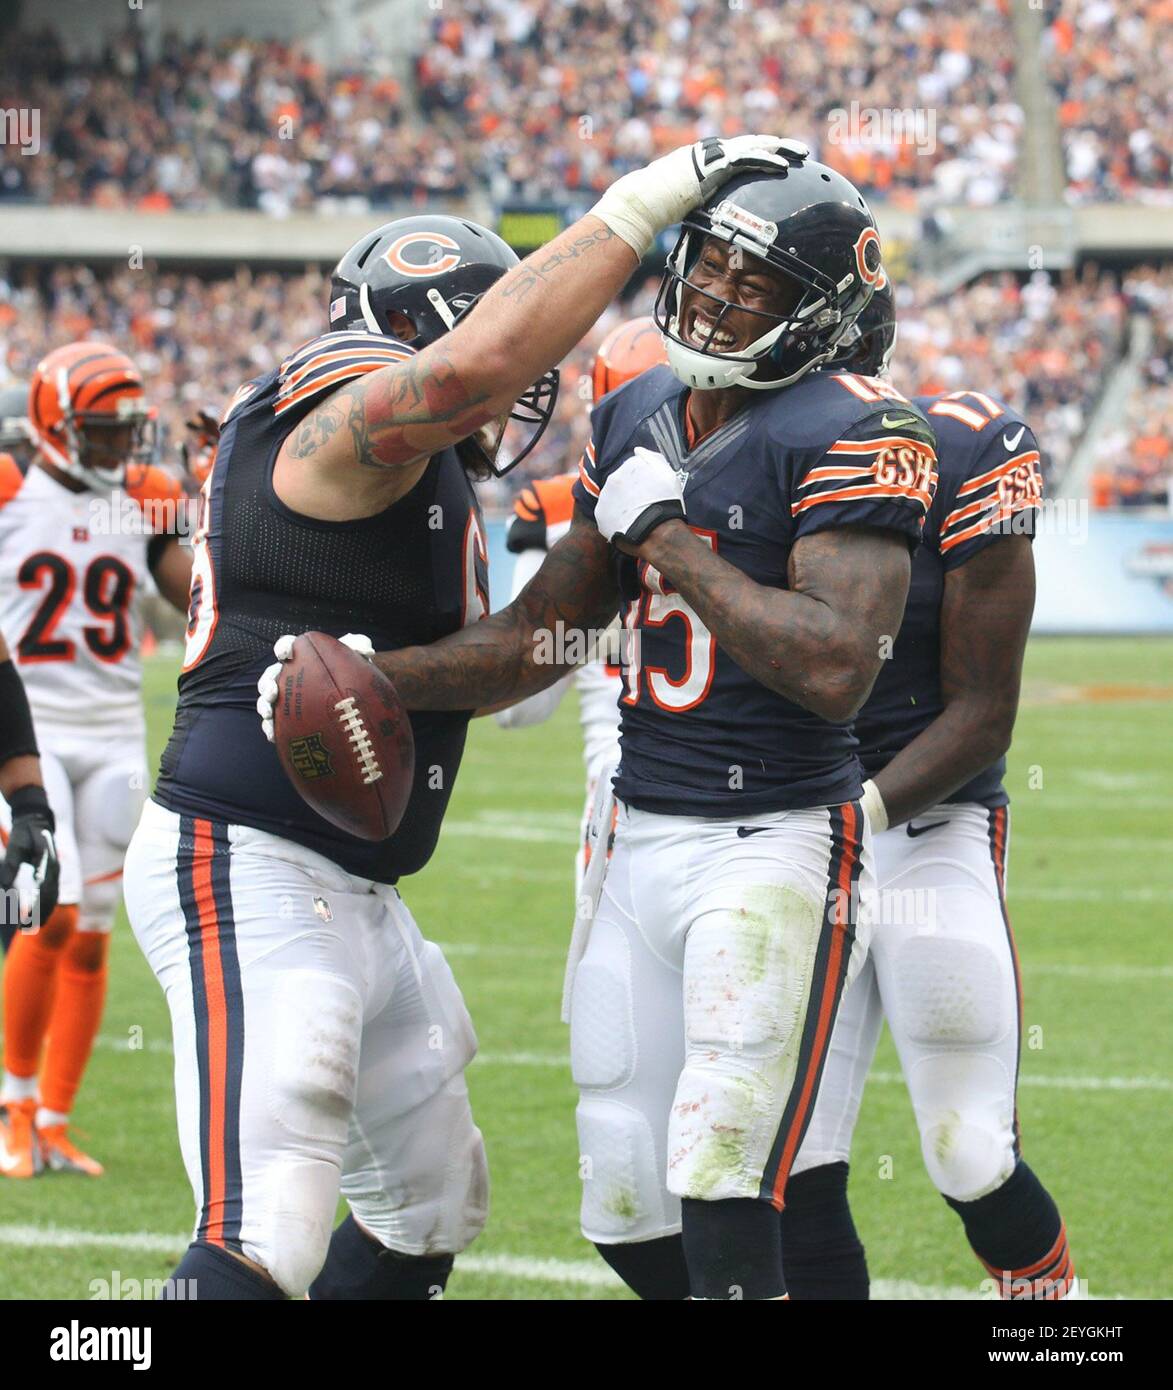 Chicago Bears wide receiver Brandon Marshall (15) celebrates his touchdown  against the Cincinnati Bengals during the fourth quarter of their game at  Soldier Field in Chicago, Illinois, on Sunday, September 8, 2013. (